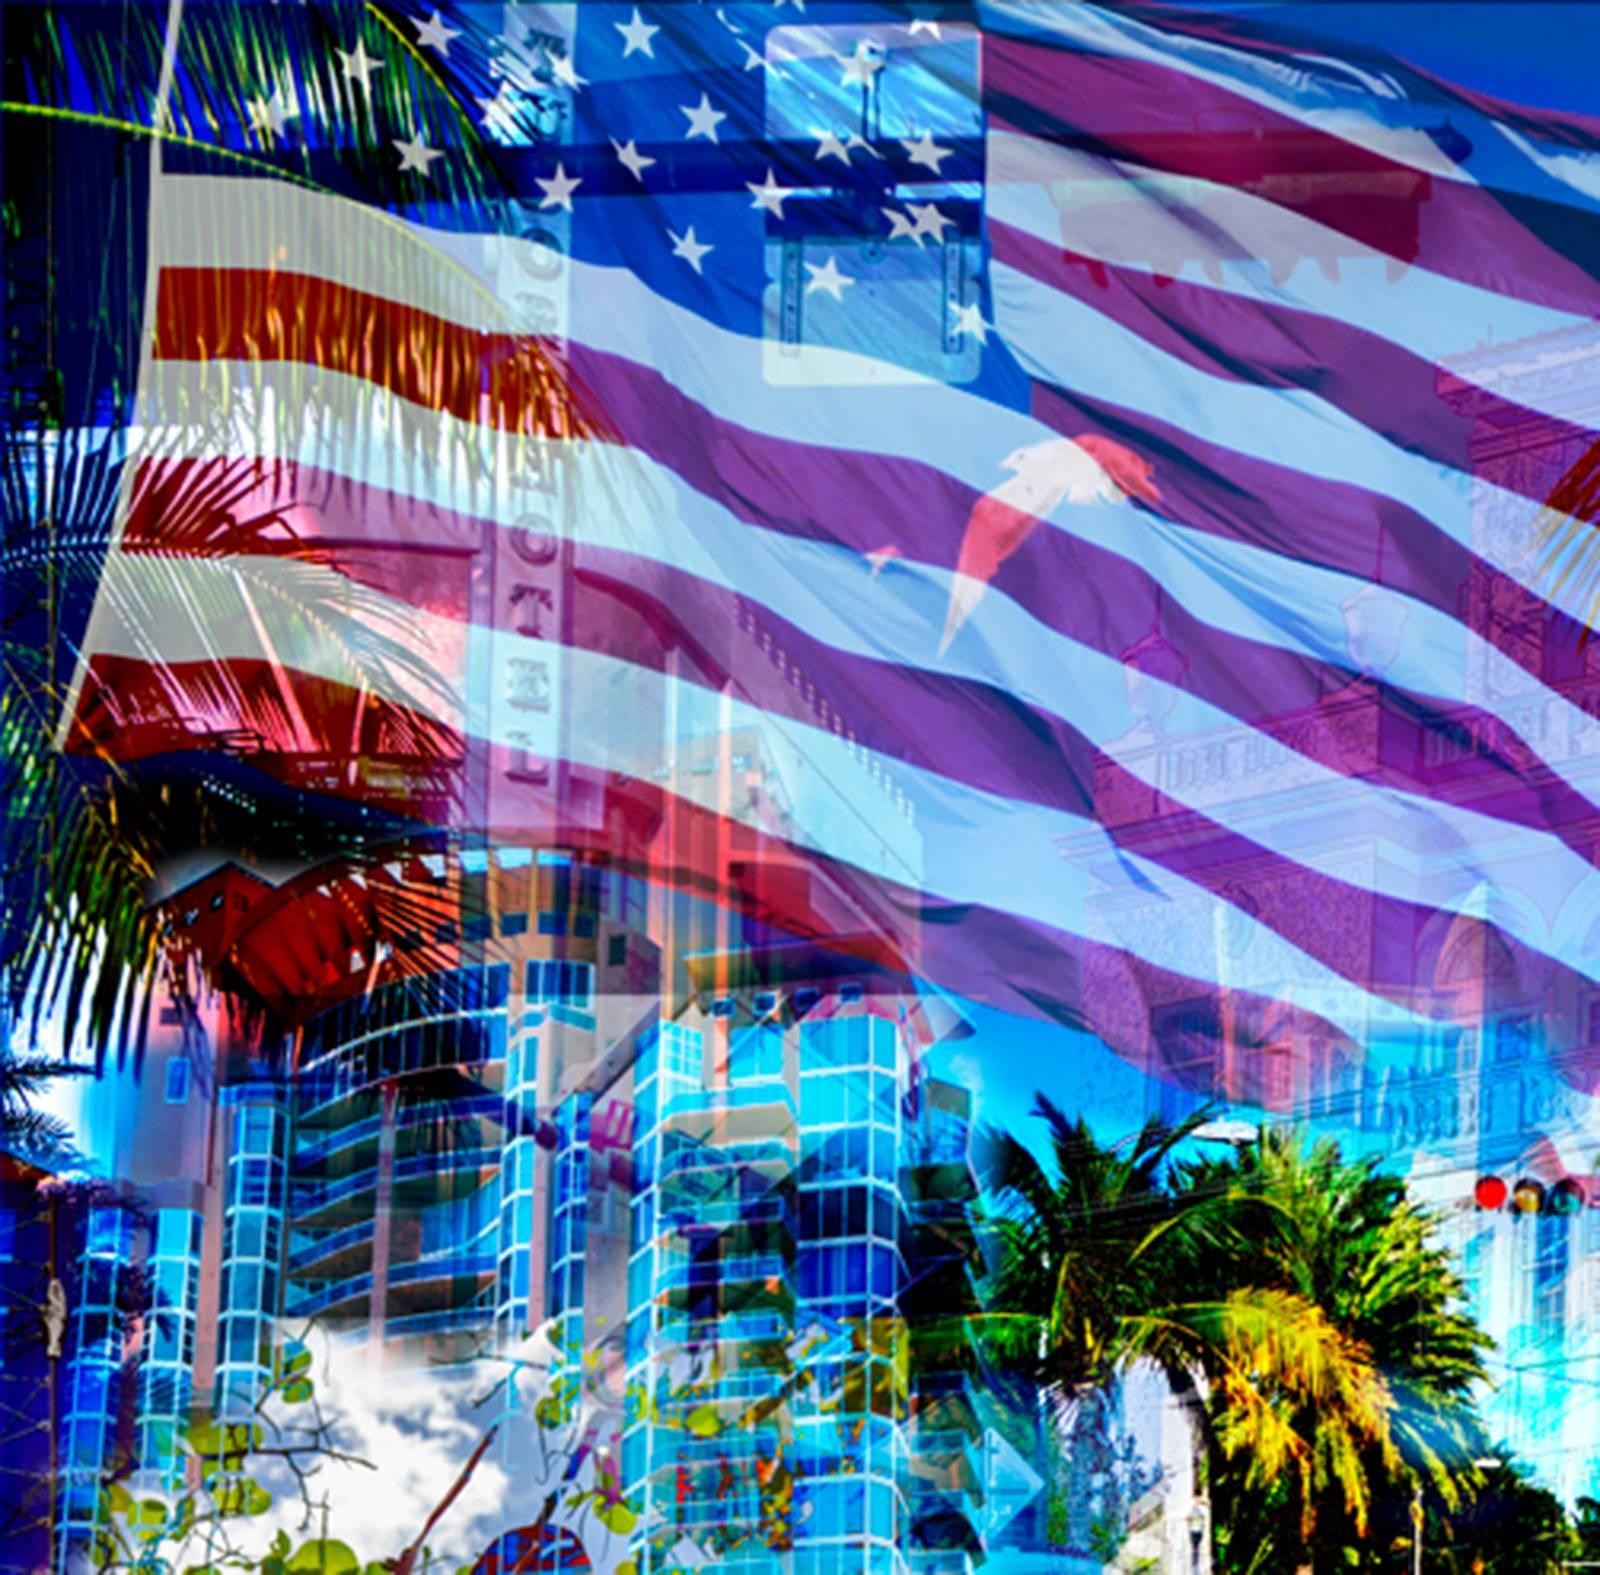 MIAMI AMERICA - The US Flag as a Symbol of Freedom in beautiful Miami - Photograph by Jacques Beneich